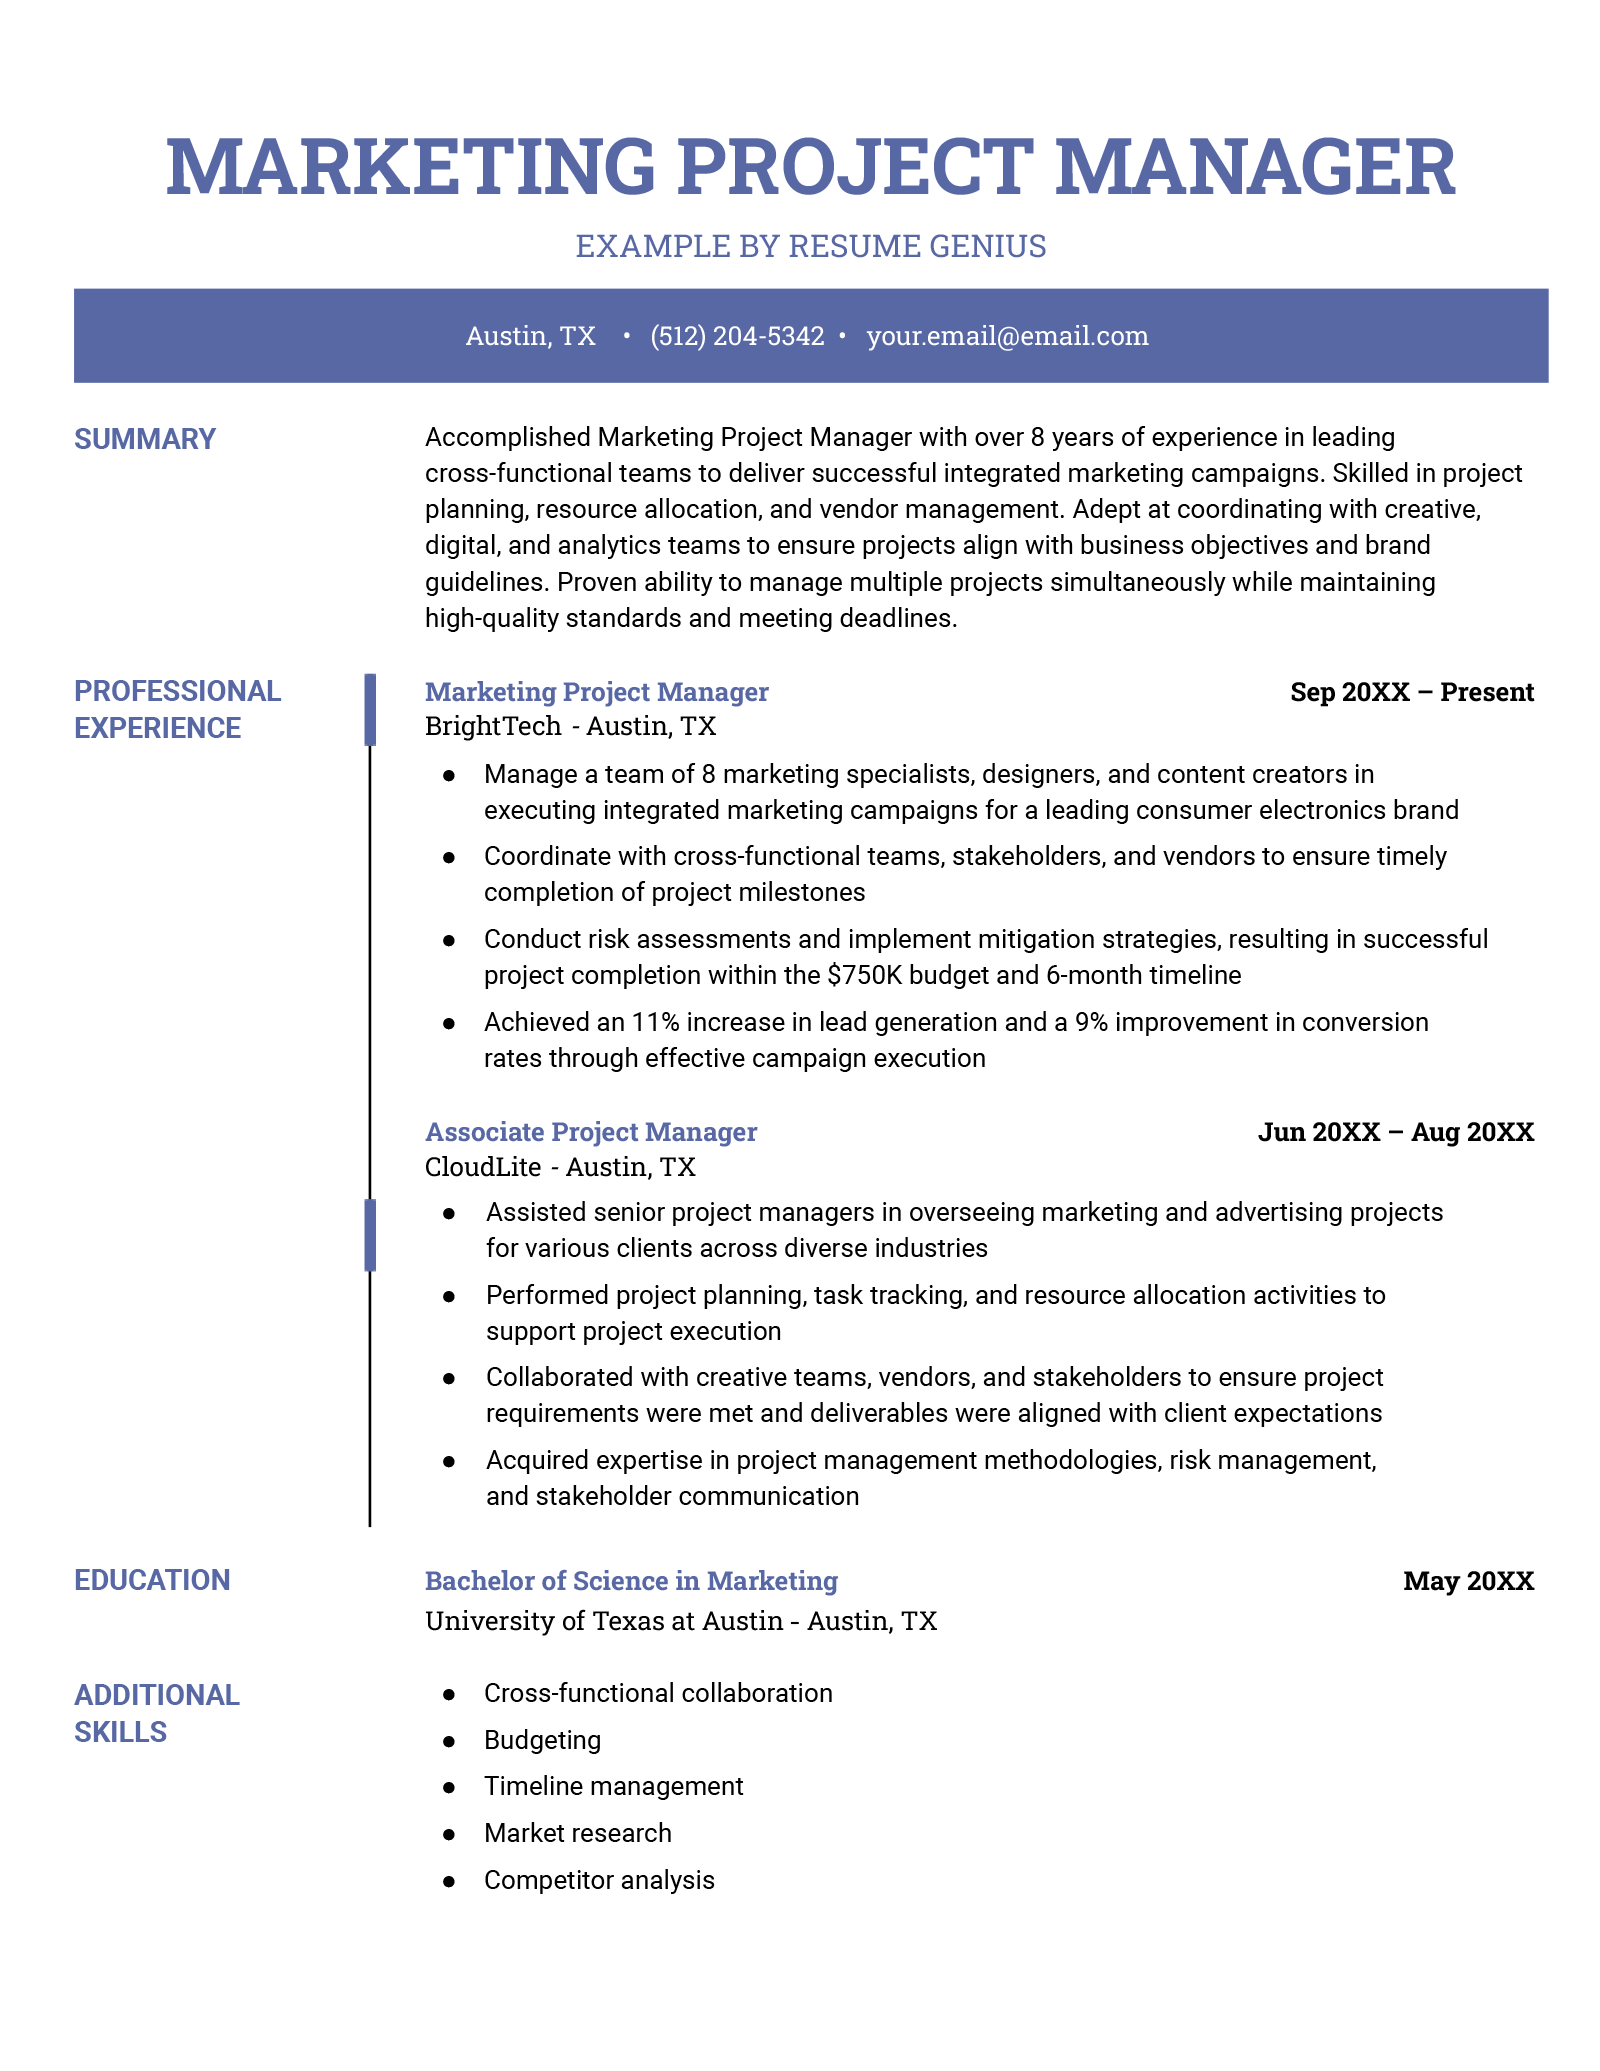 An example resume for a marketing project manager.